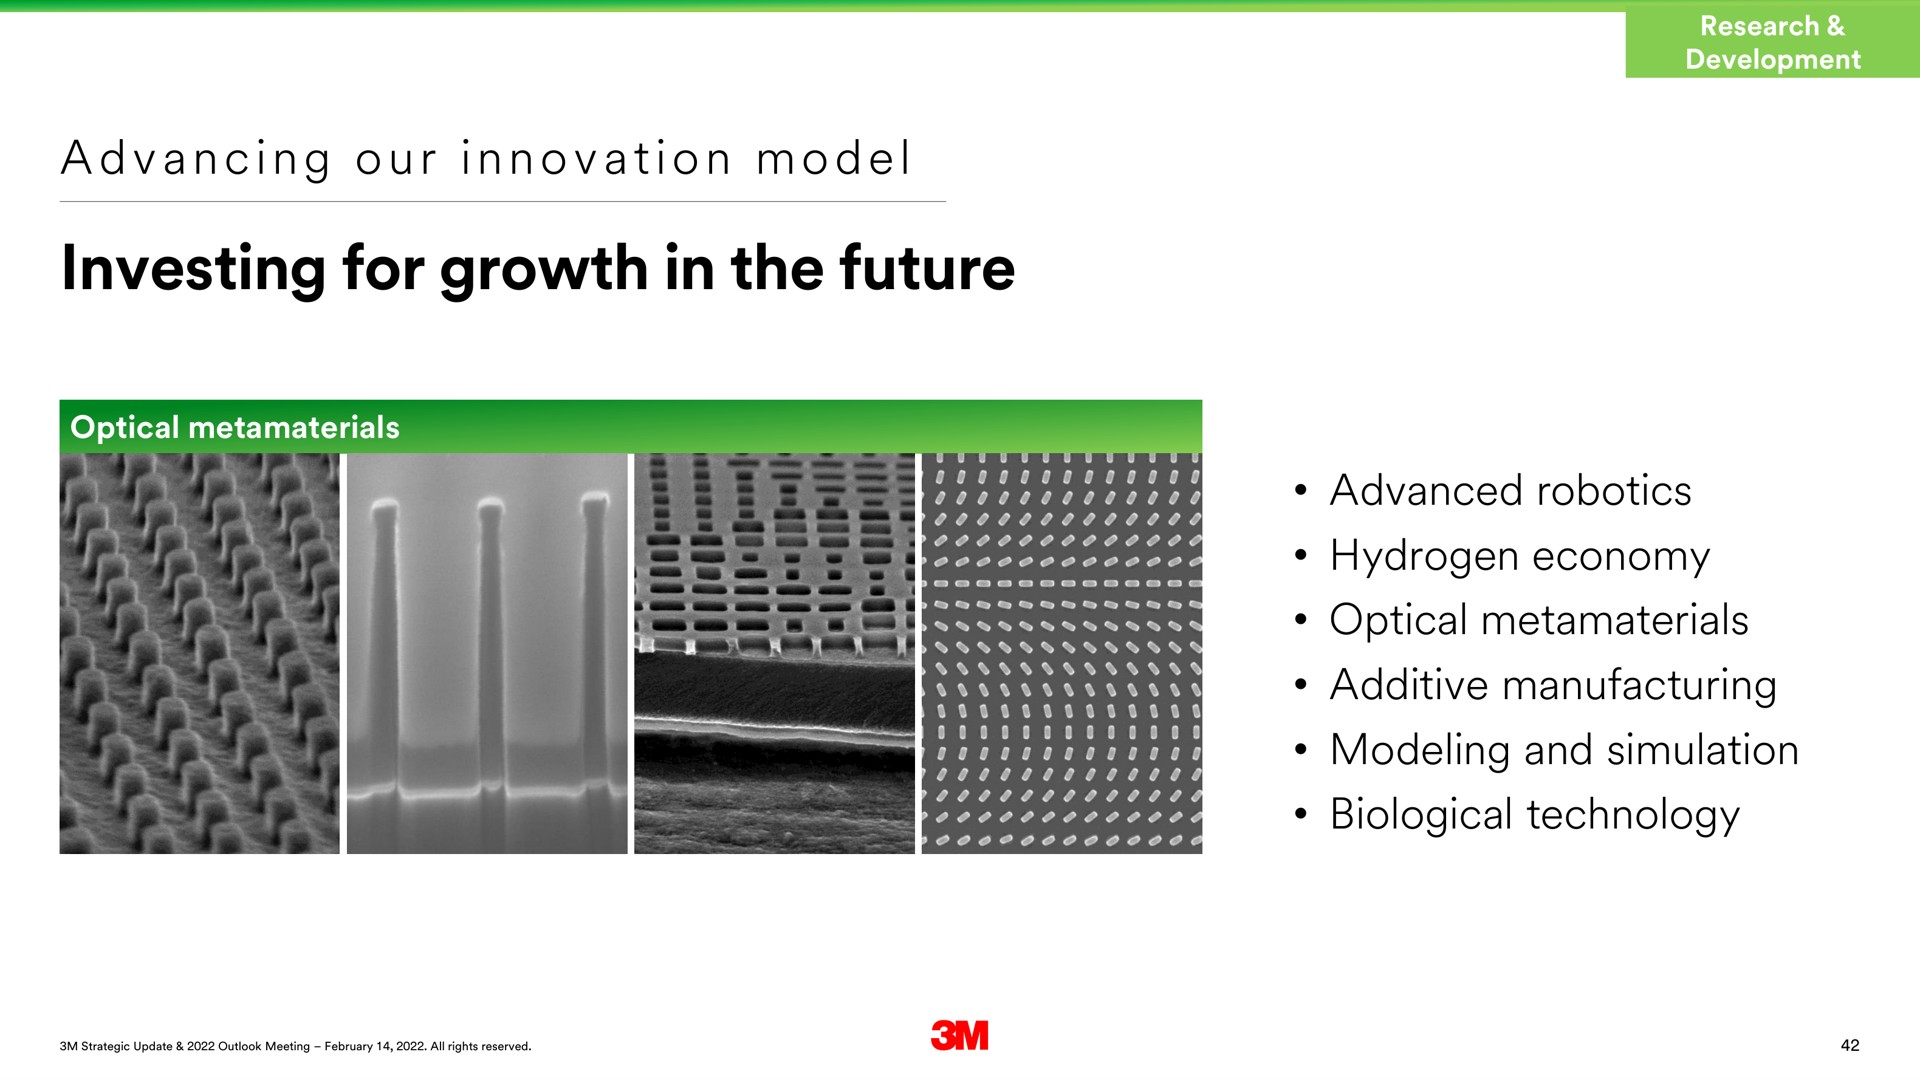 a a i i a i investing for growth in the future advanced hydrogen economy optical additive manufacturing modeling and simulation biological technology advancing our innovation model | 3M